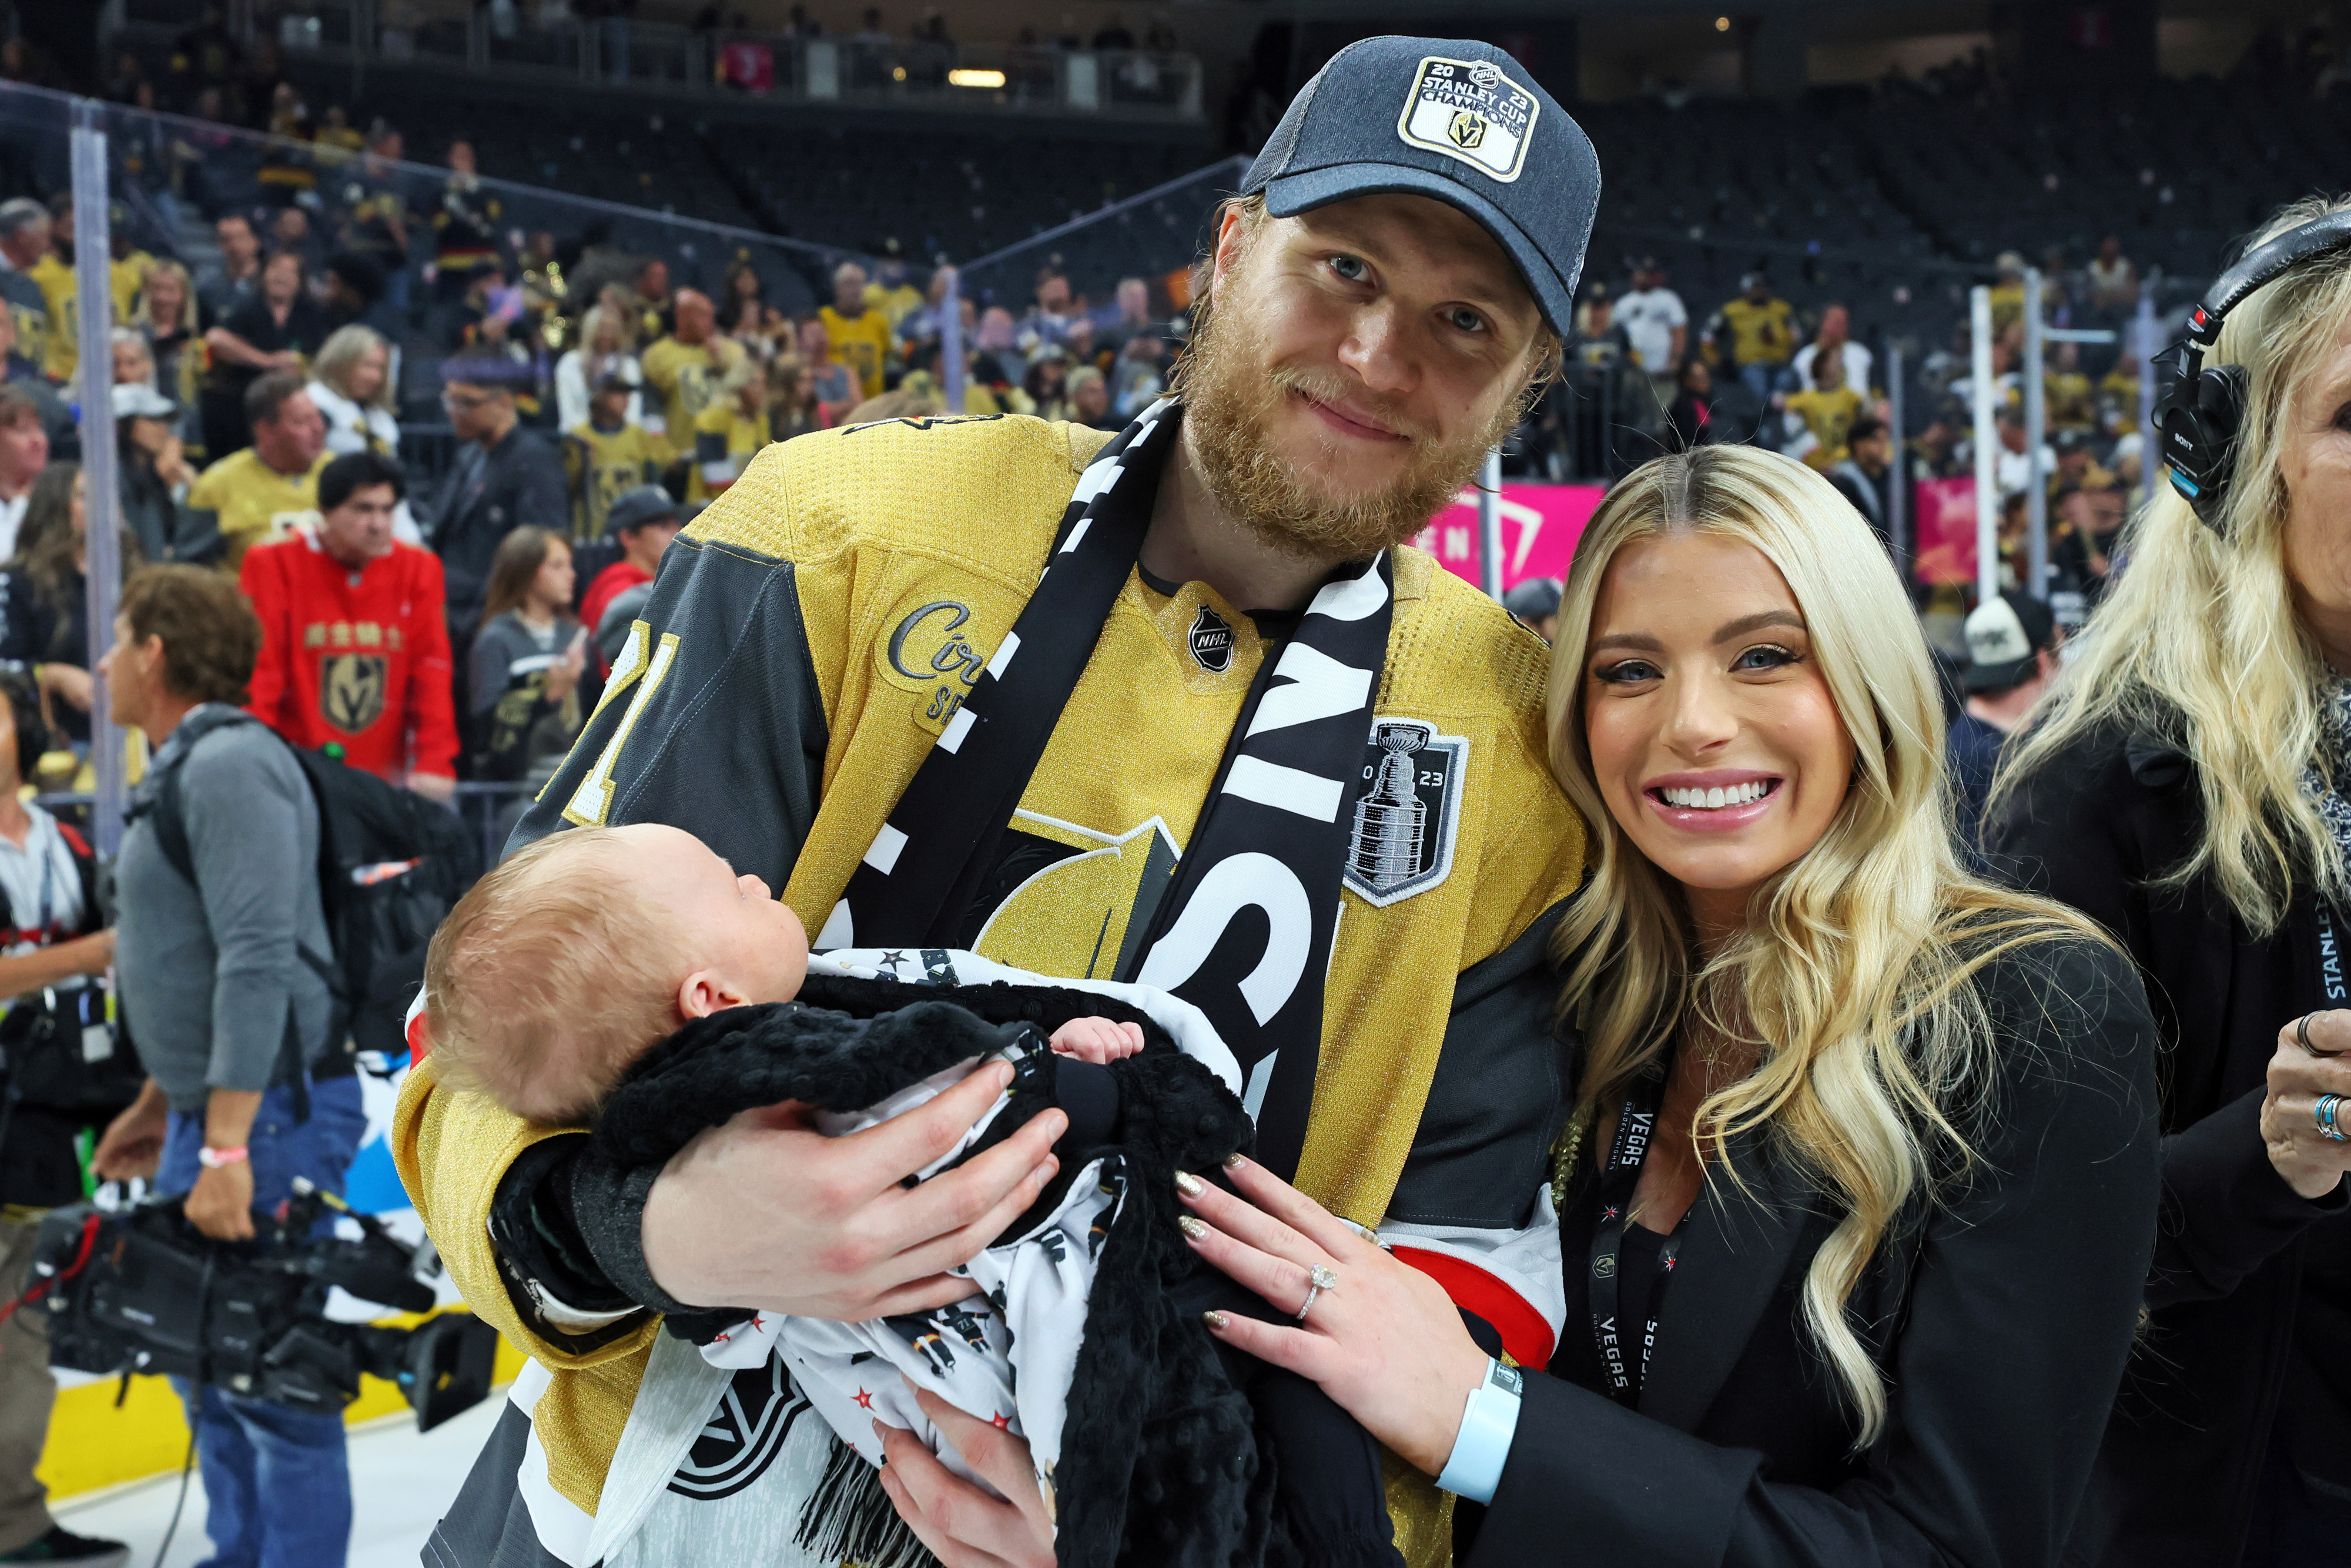 Man in hockey jersey holding a baby, standing next to a woman, at a sports event